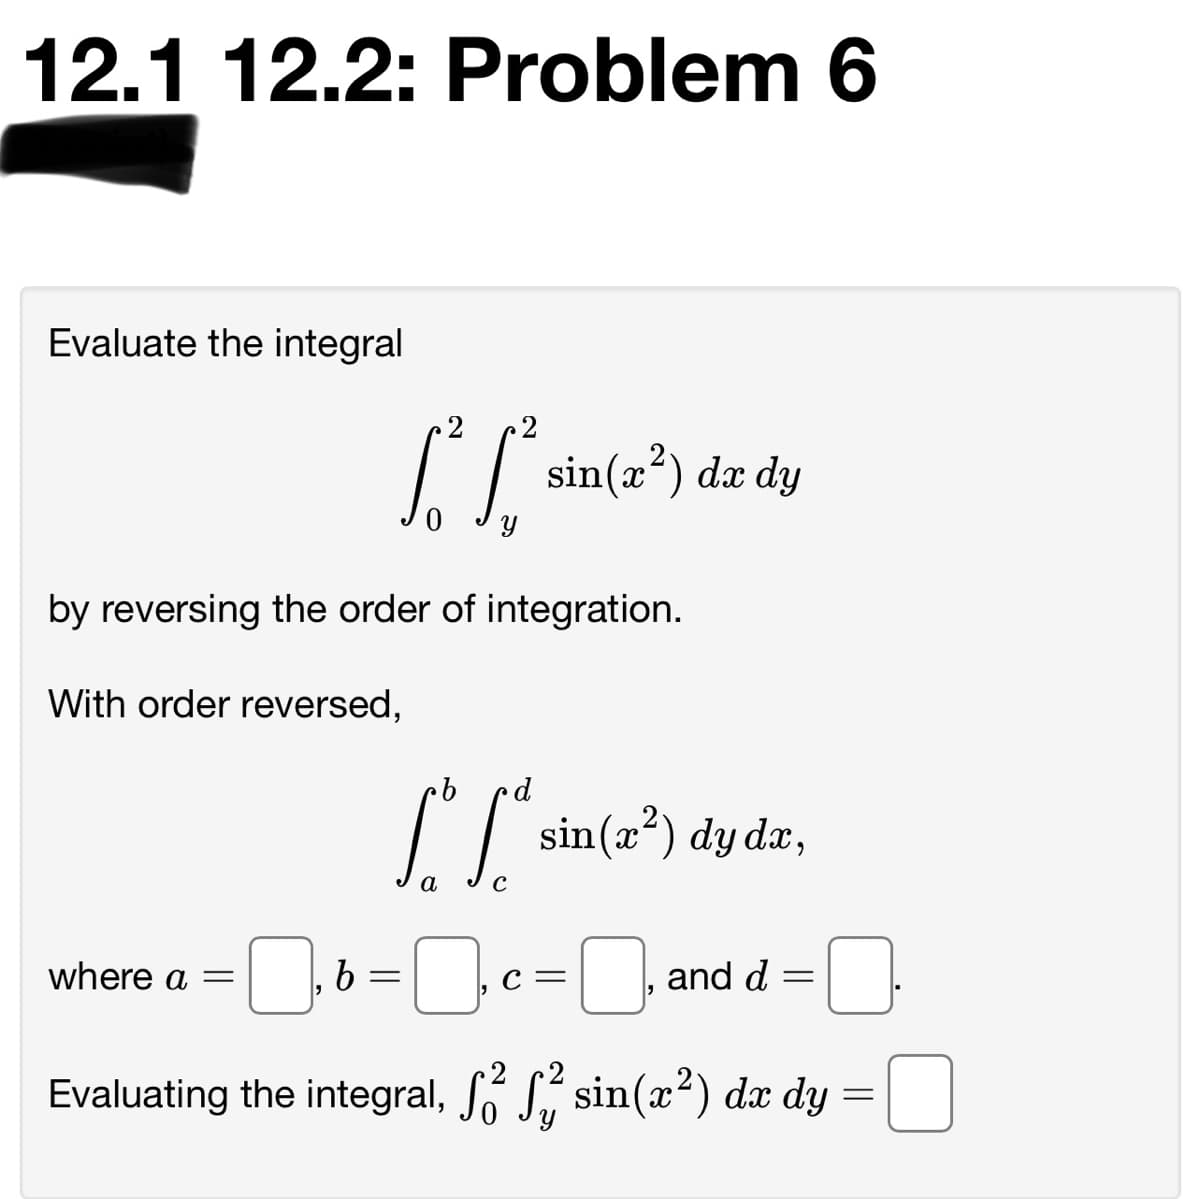 12.1 12.2: Problem 6
Evaluate the integral
2
2
[S
sin(x*) dx dy
by reversing the order of integration.
With order reversed,
I sin(2") dy dz,
a
where a
and d
C=
Evaluating the integral, Só S, sin(x²) dx dy
